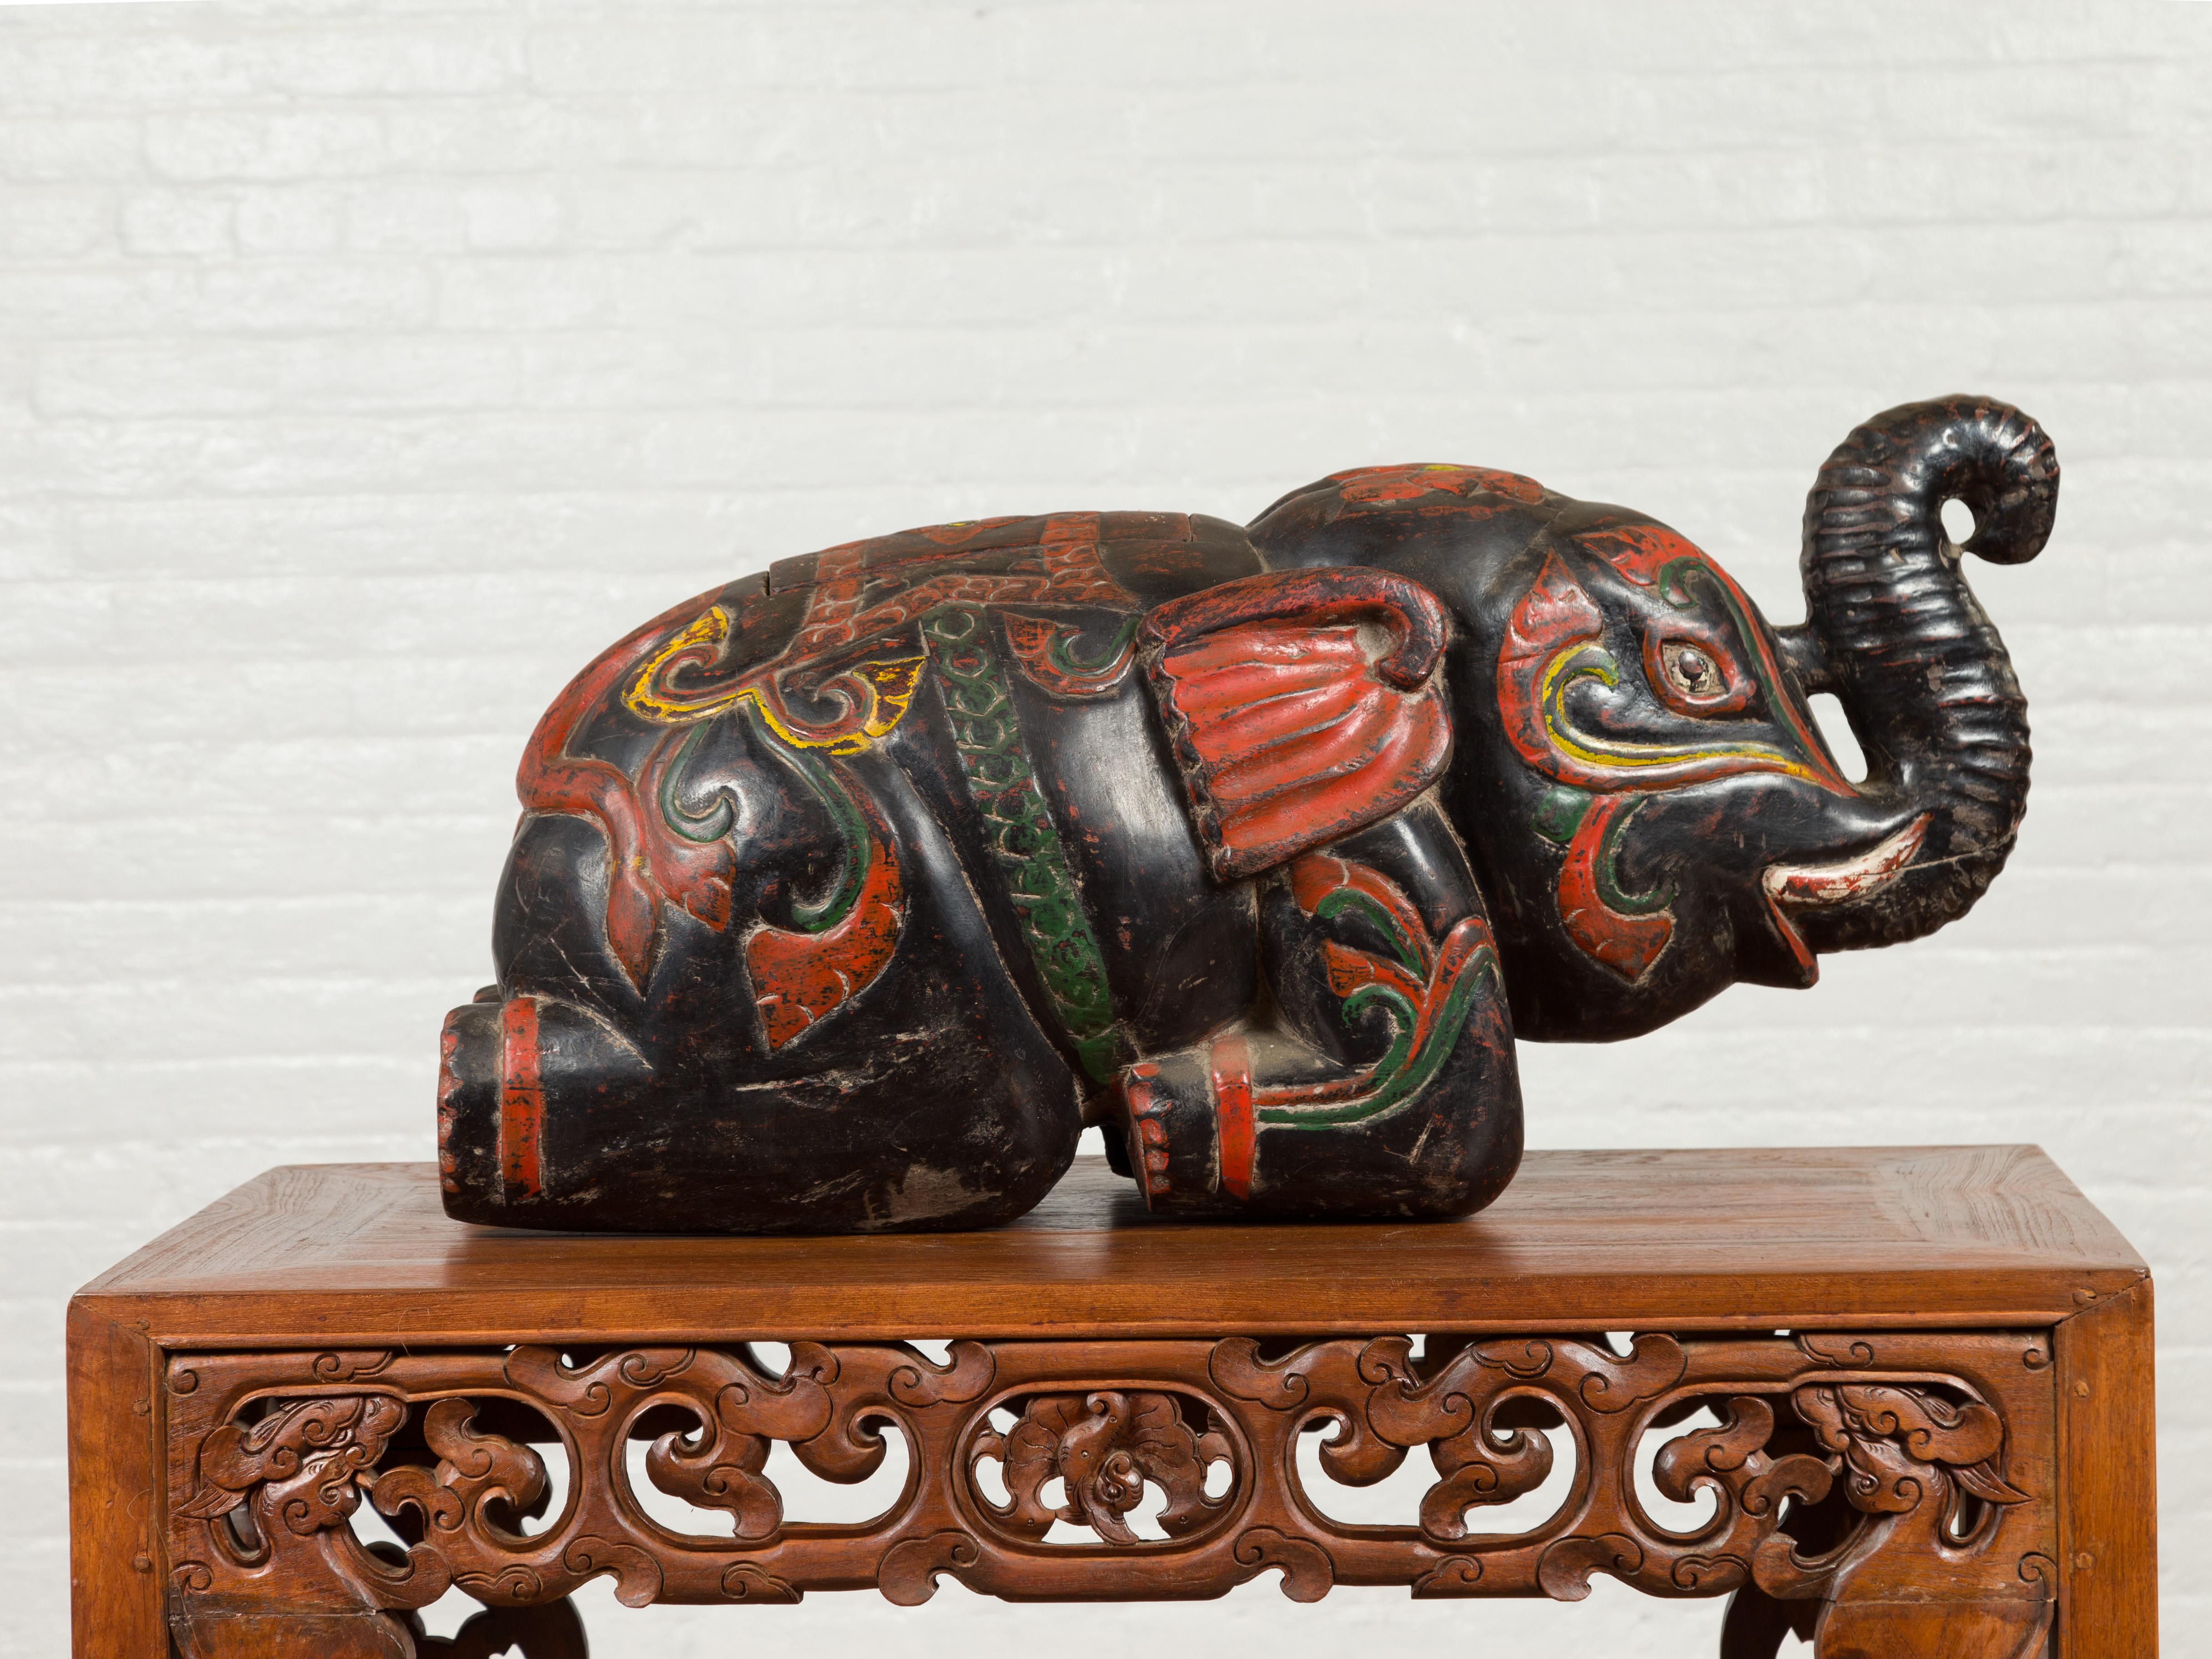 Handmade Asian Elephant Sculpture with Incised Decor and Multi-Color Finish 1